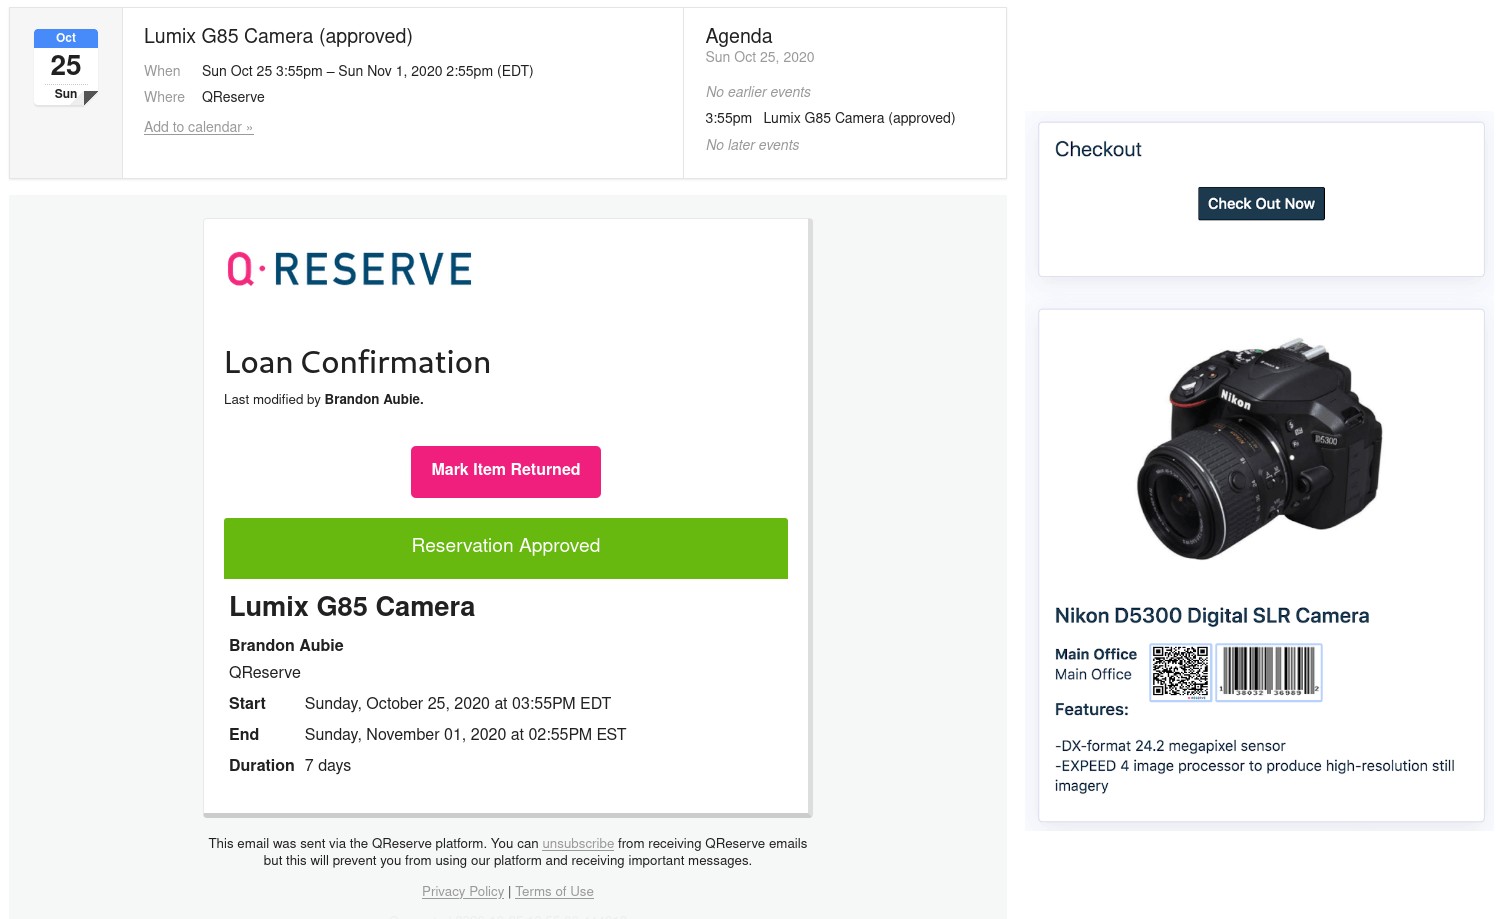 Checkout UI and confirmation email